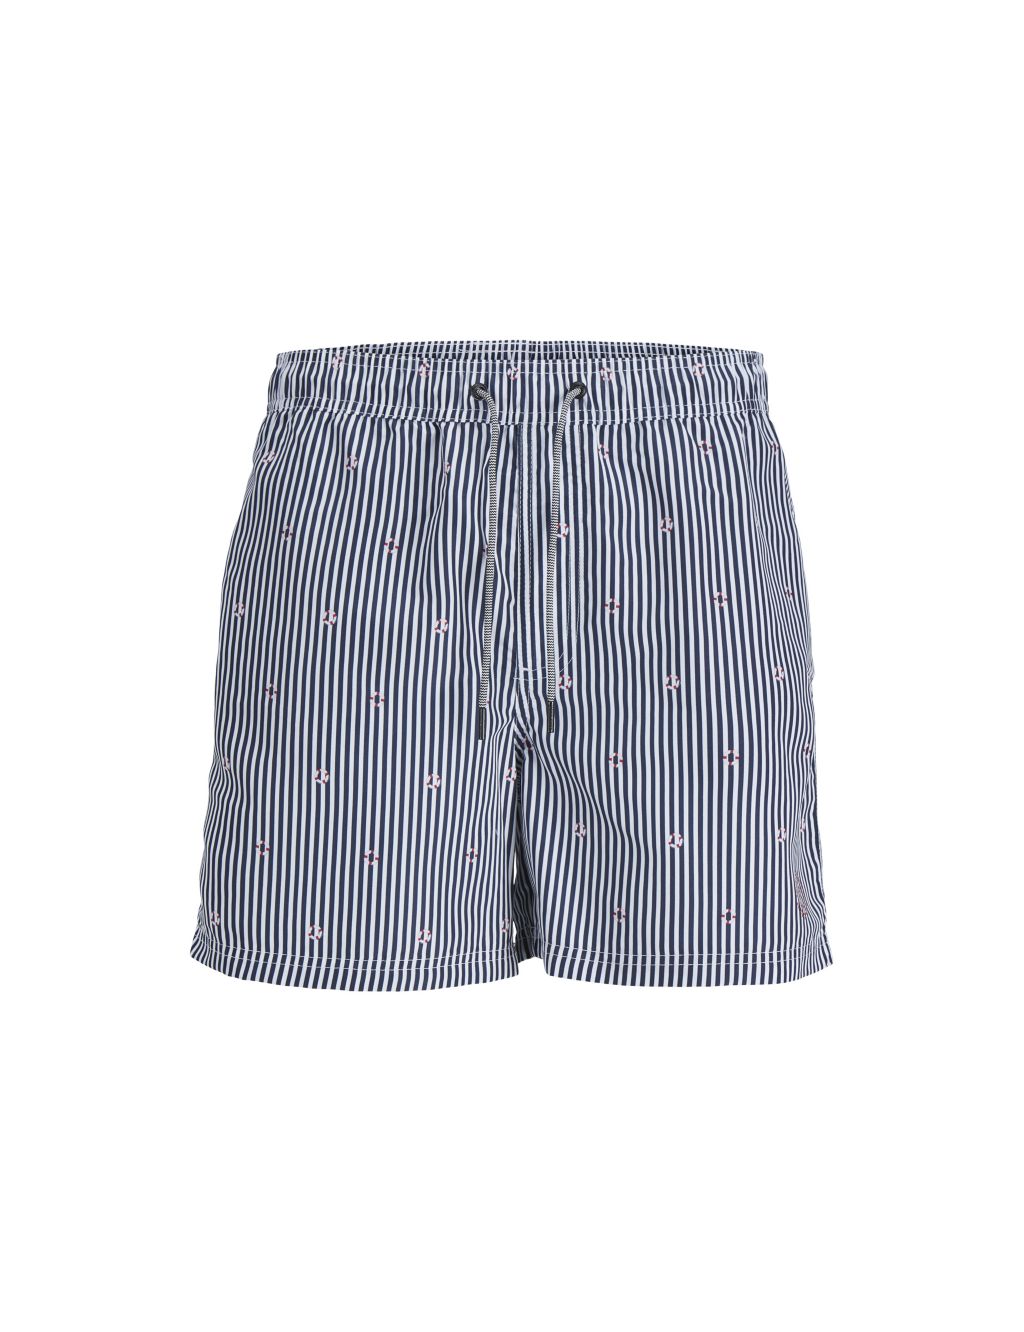 Striped Embroidered Swim Shorts